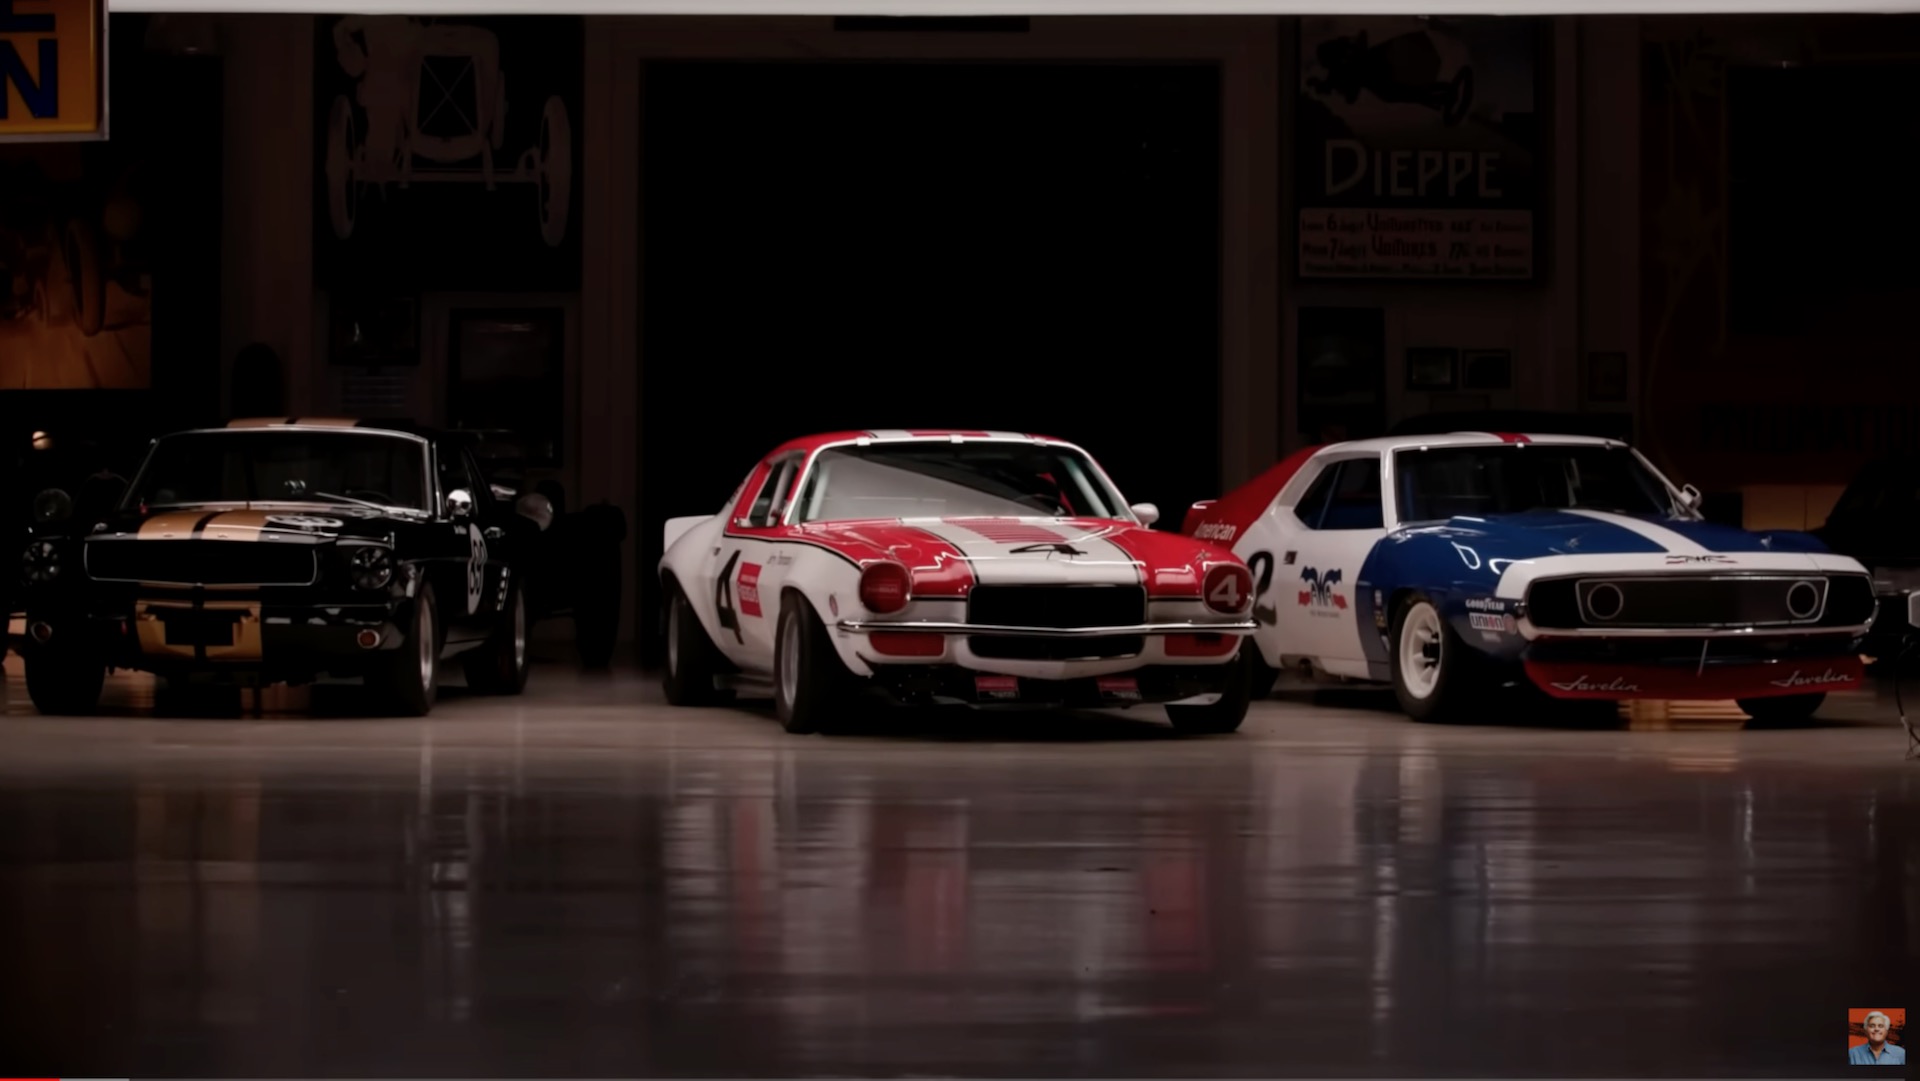 Learn about Trans Am racing history with Jay Leno